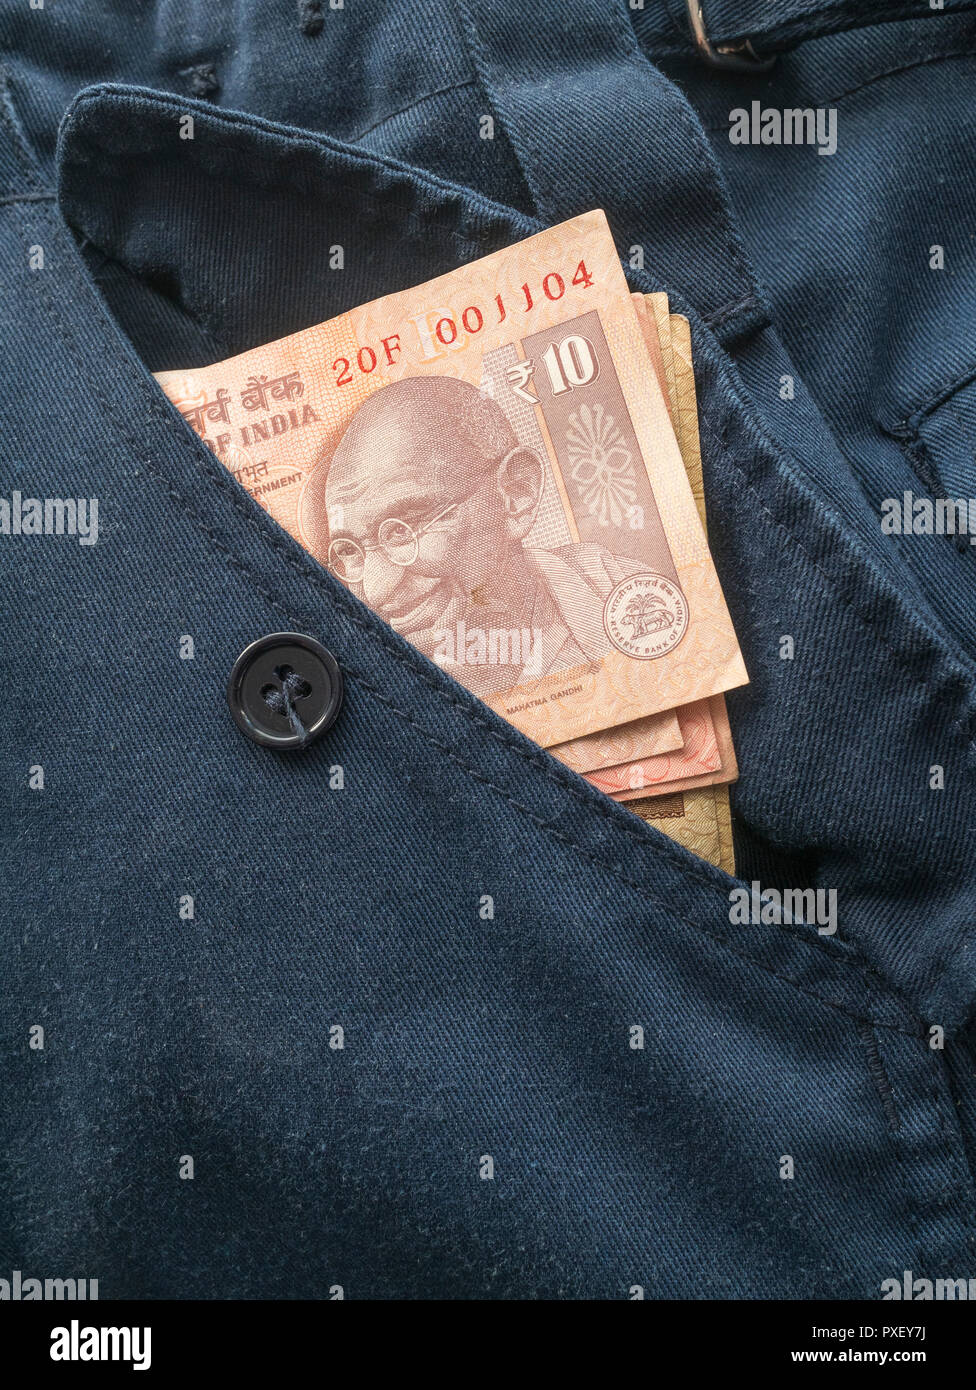 Indian 10 Rupee banknote in pocket. Metaphor personal earnings, Indian wages levels, India economy, India rupee currency, BRICS, India interest rate. Stock Photo